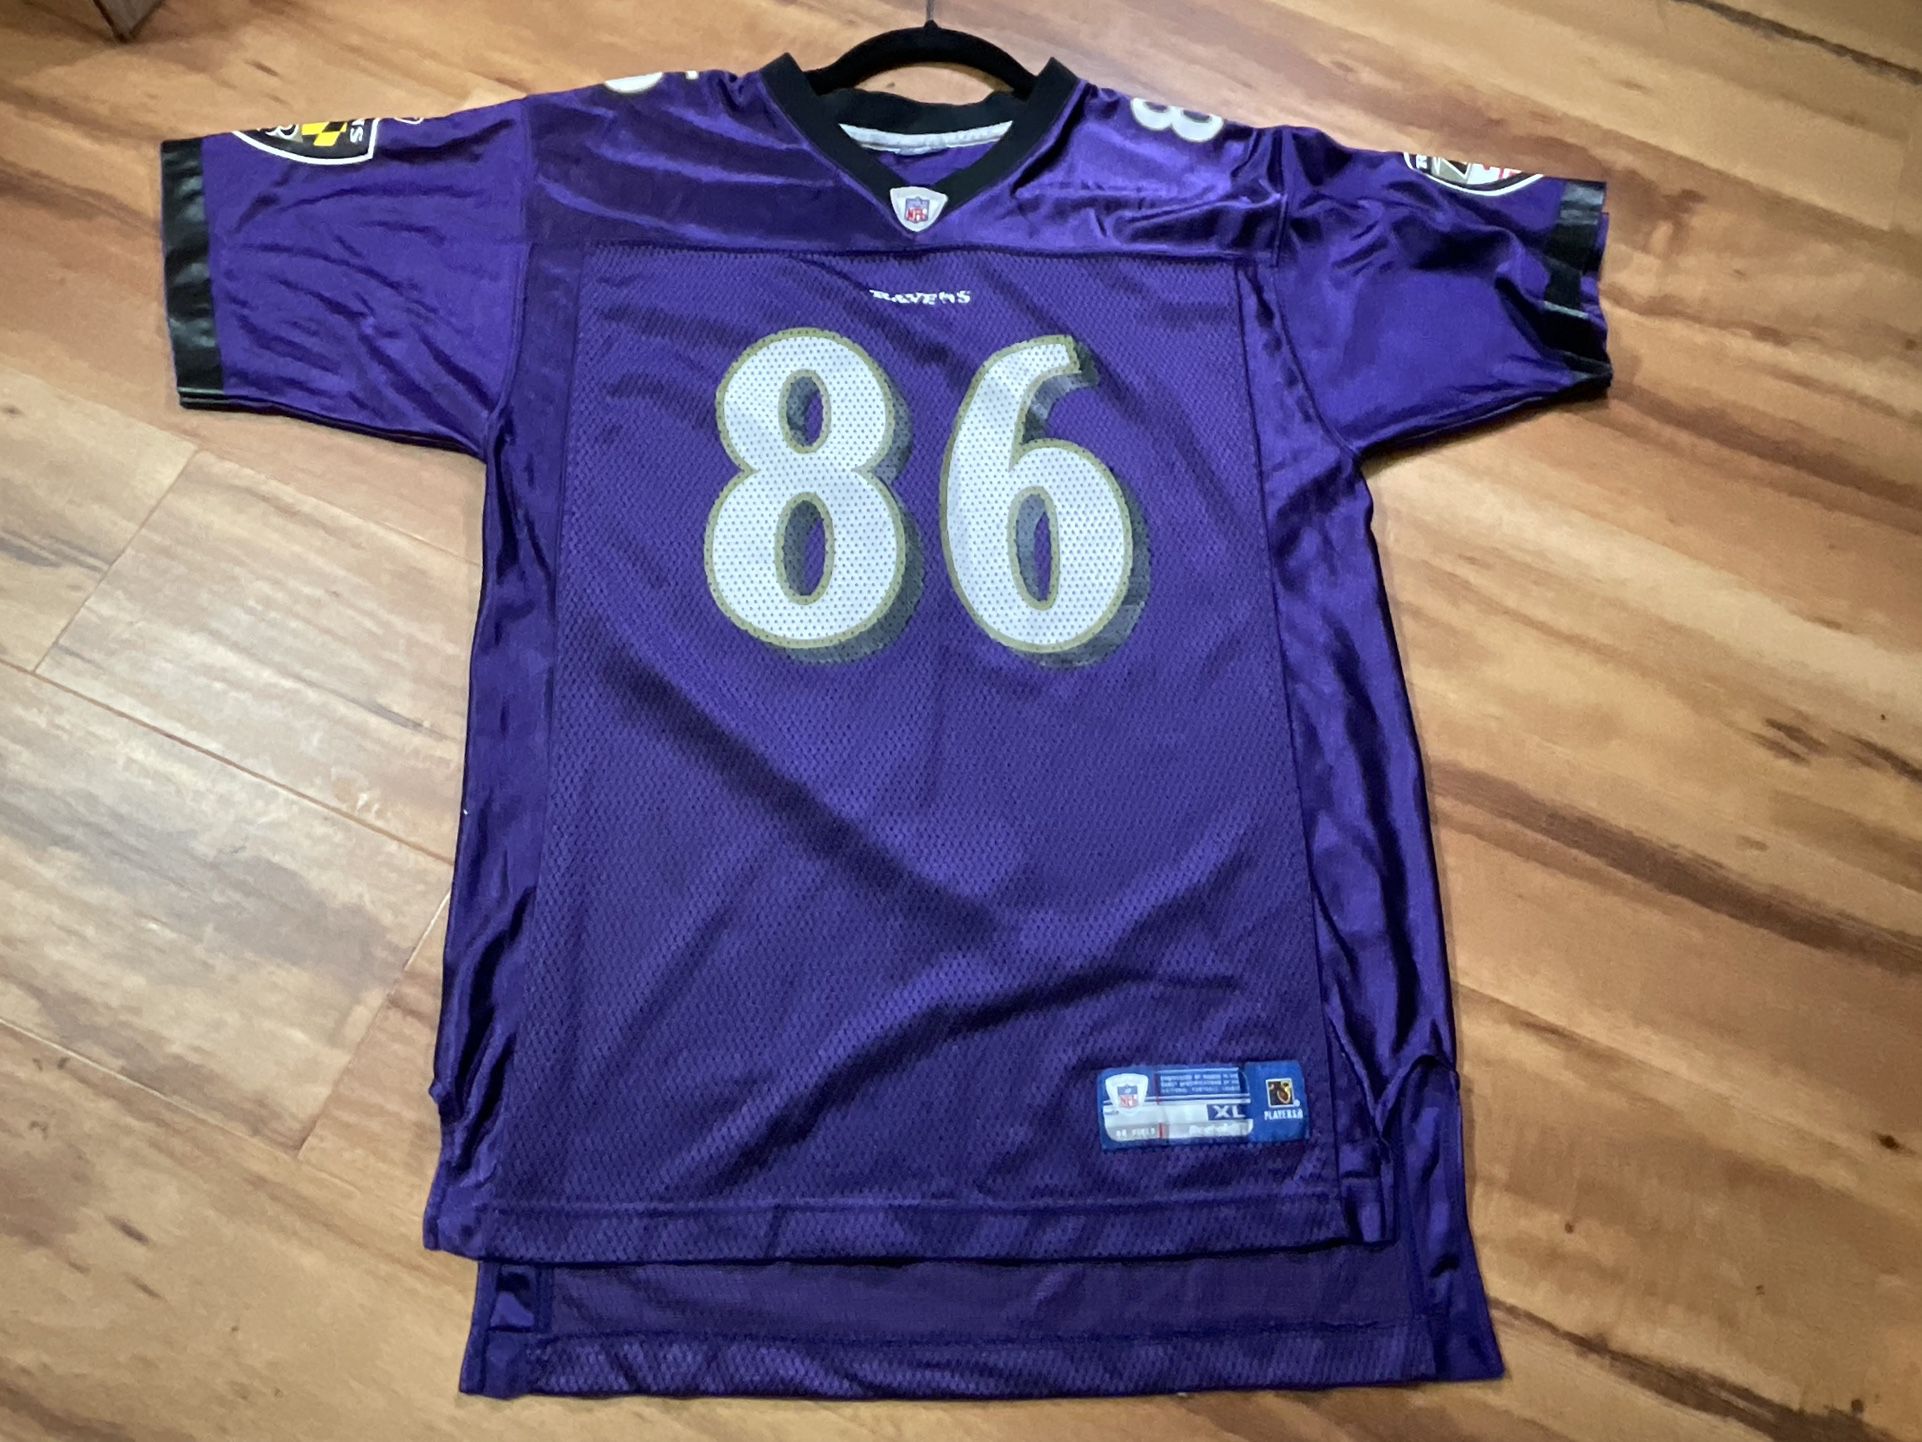 Reebok Baltimore Ravens Todd Heap #86 Jersey Men’s Size XL Purple NFL On Field No rips, tears or stains